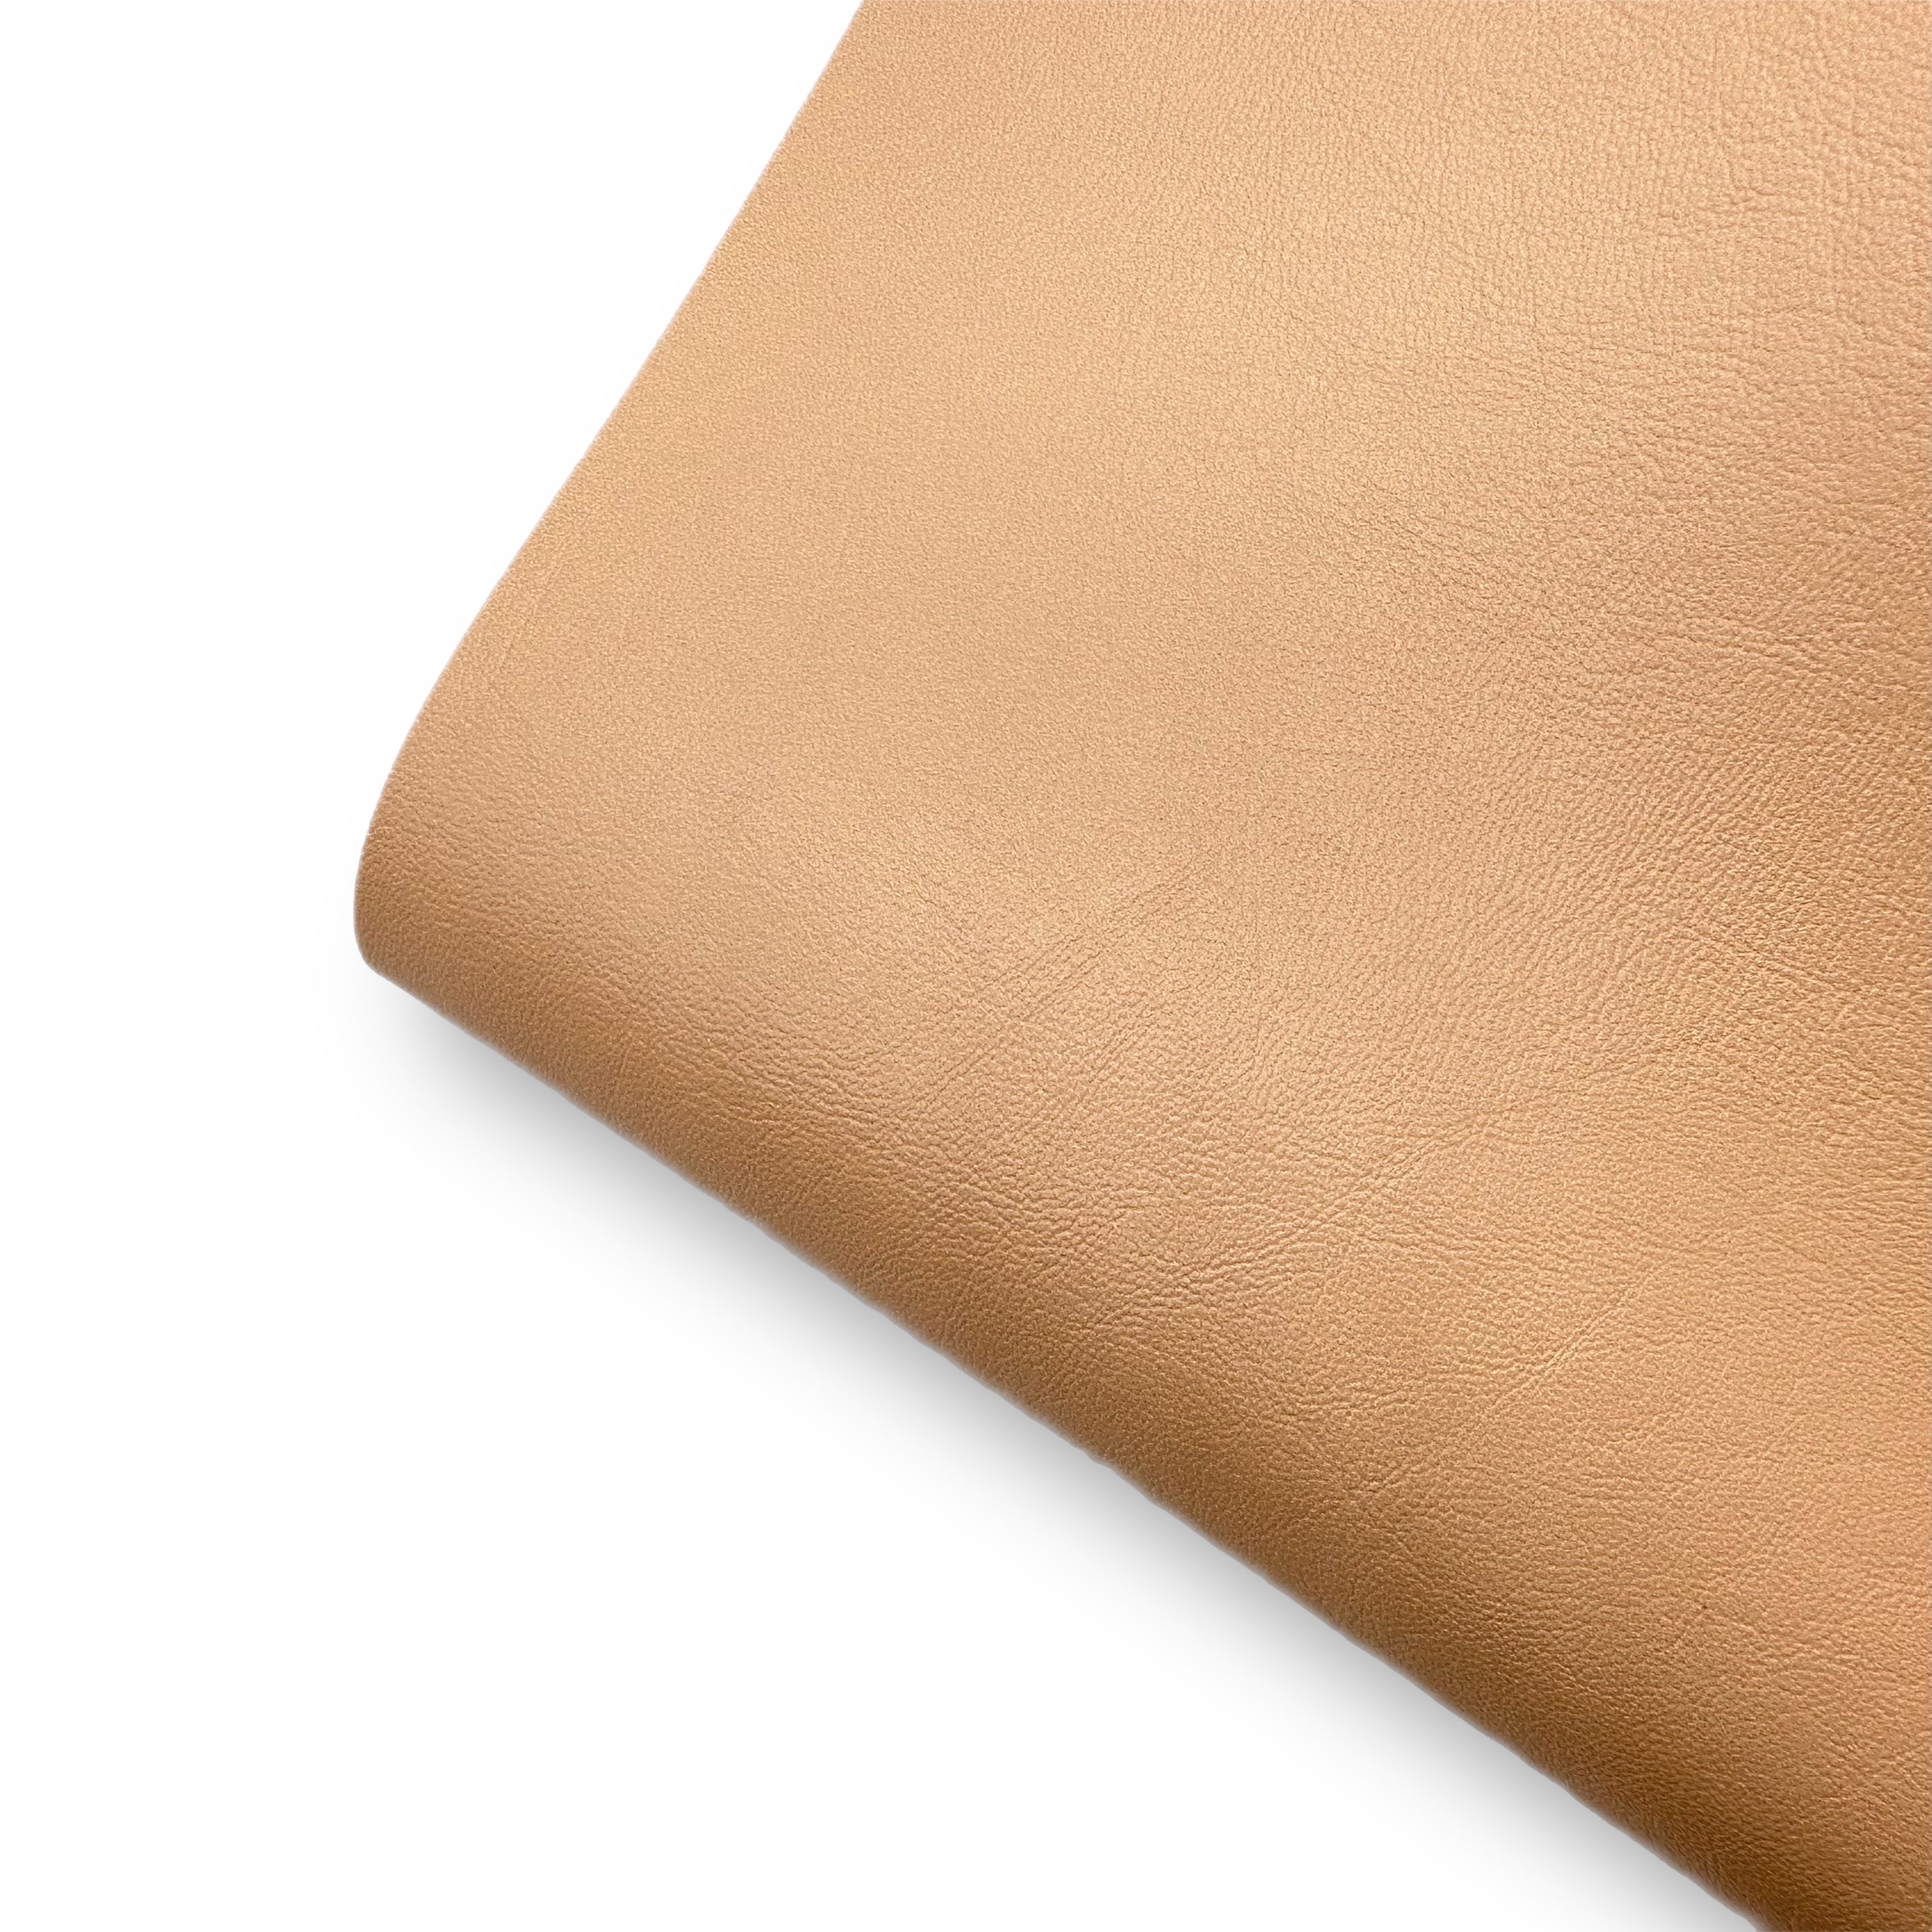 Naturally Nude Core Colour Premium Faux Leather Fabric Sheets